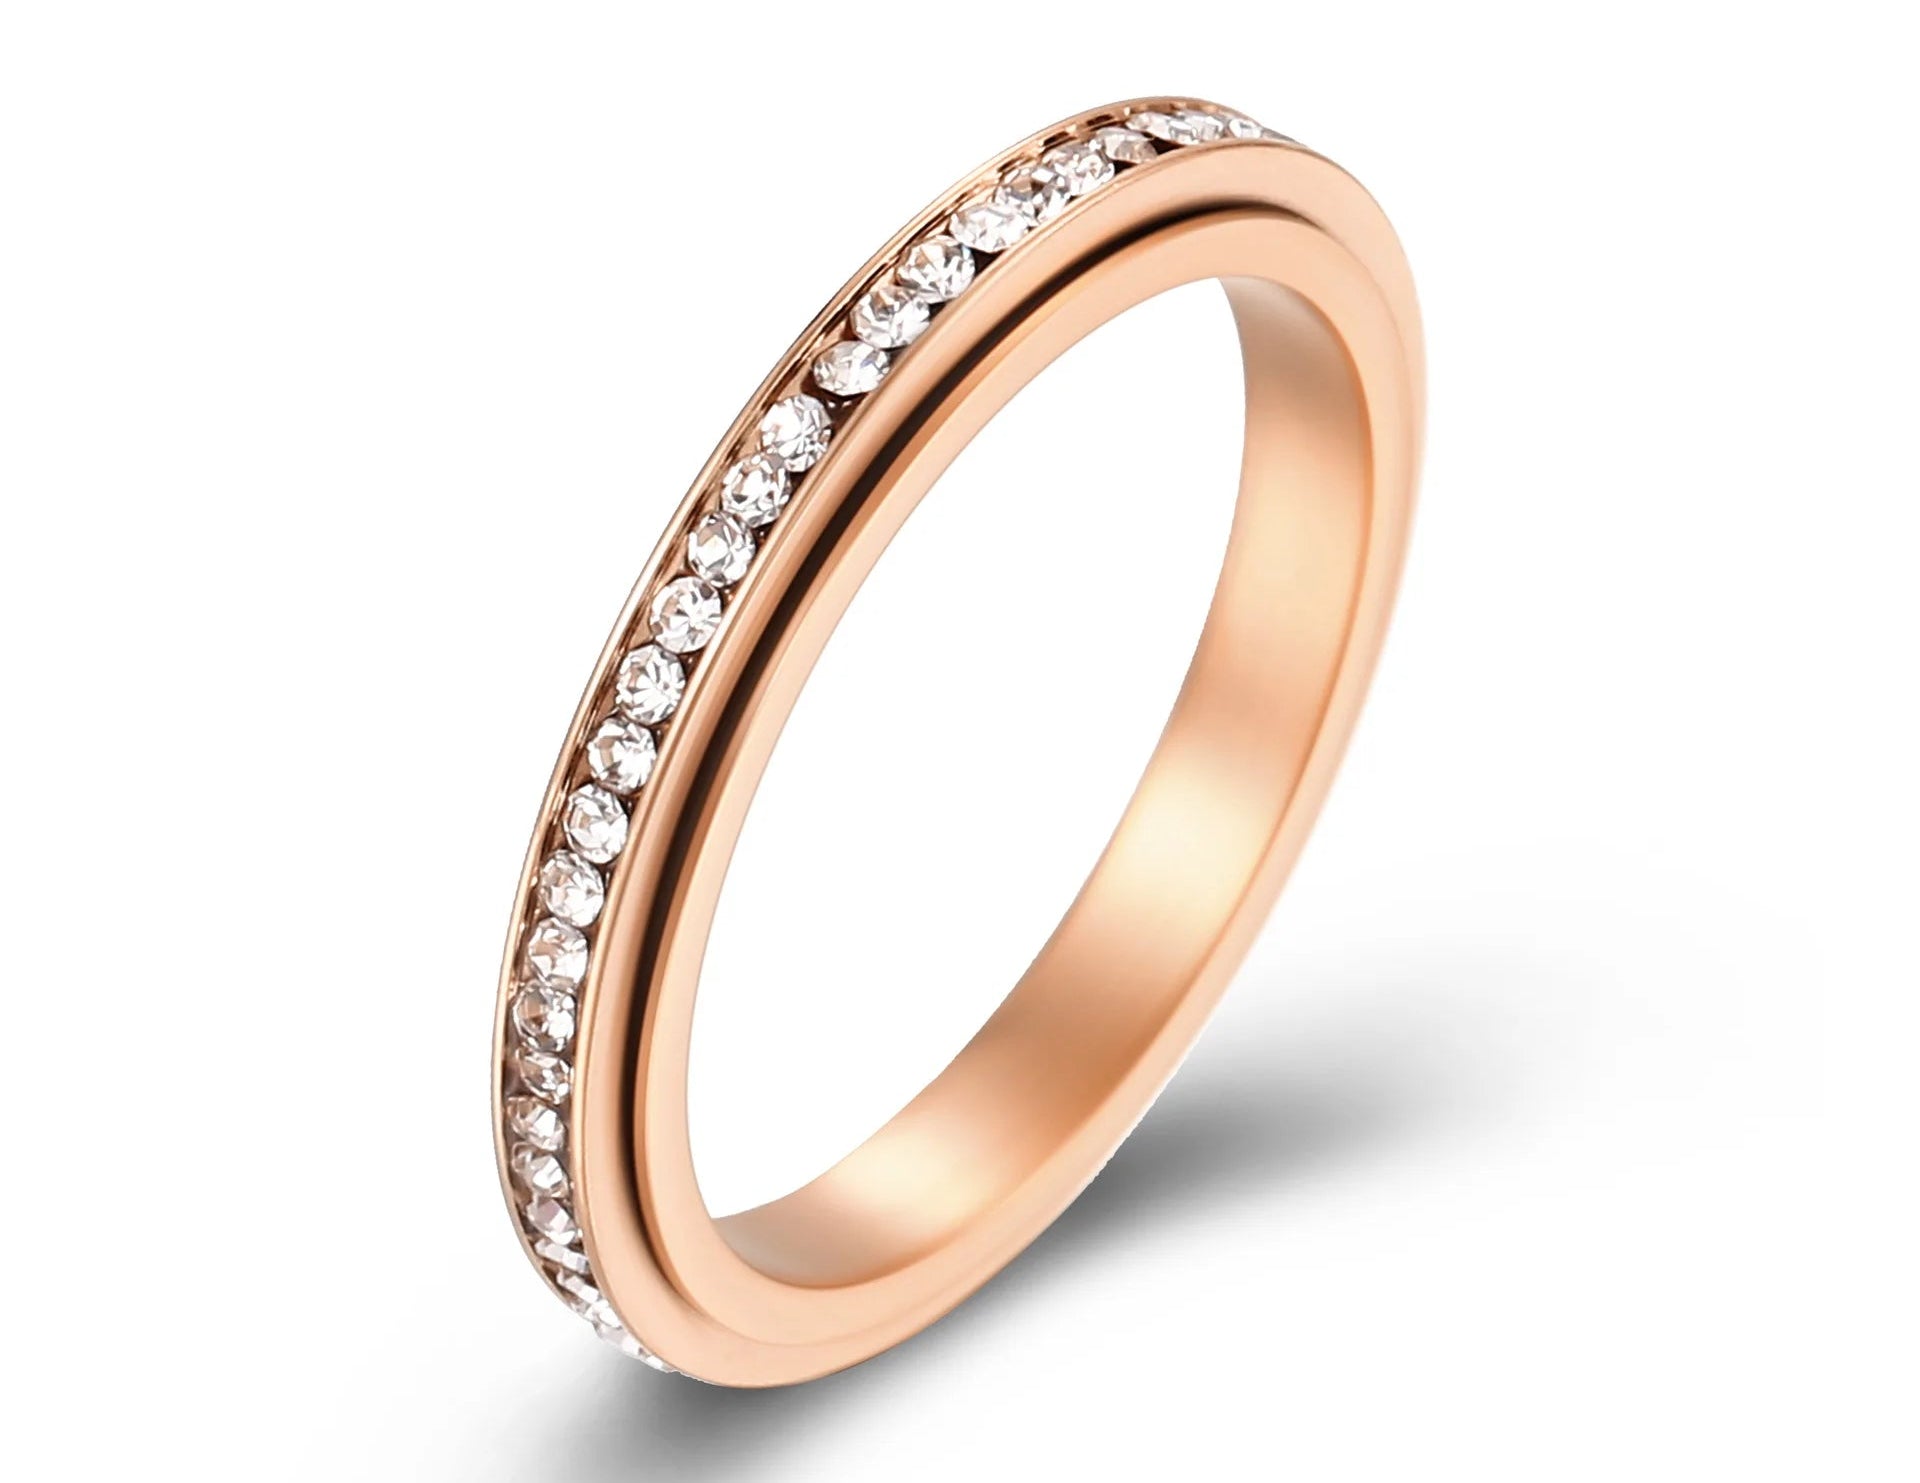 Eternity Band Spinner Ring The Autistic Innovator Rose gold 5 